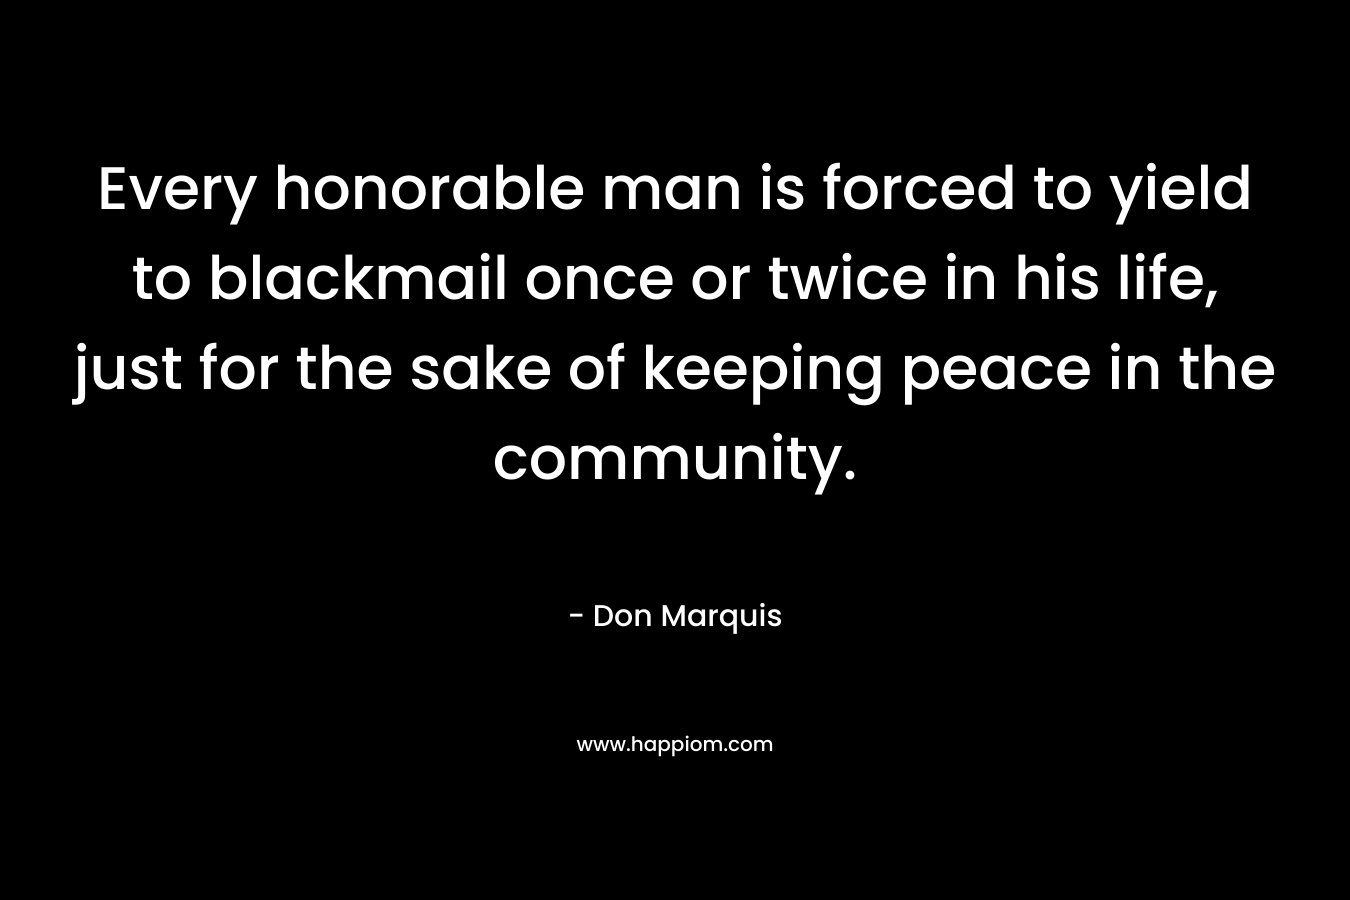 Every honorable man is forced to yield to blackmail once or twice in his life, just for the sake of keeping peace in the community. – Don Marquis